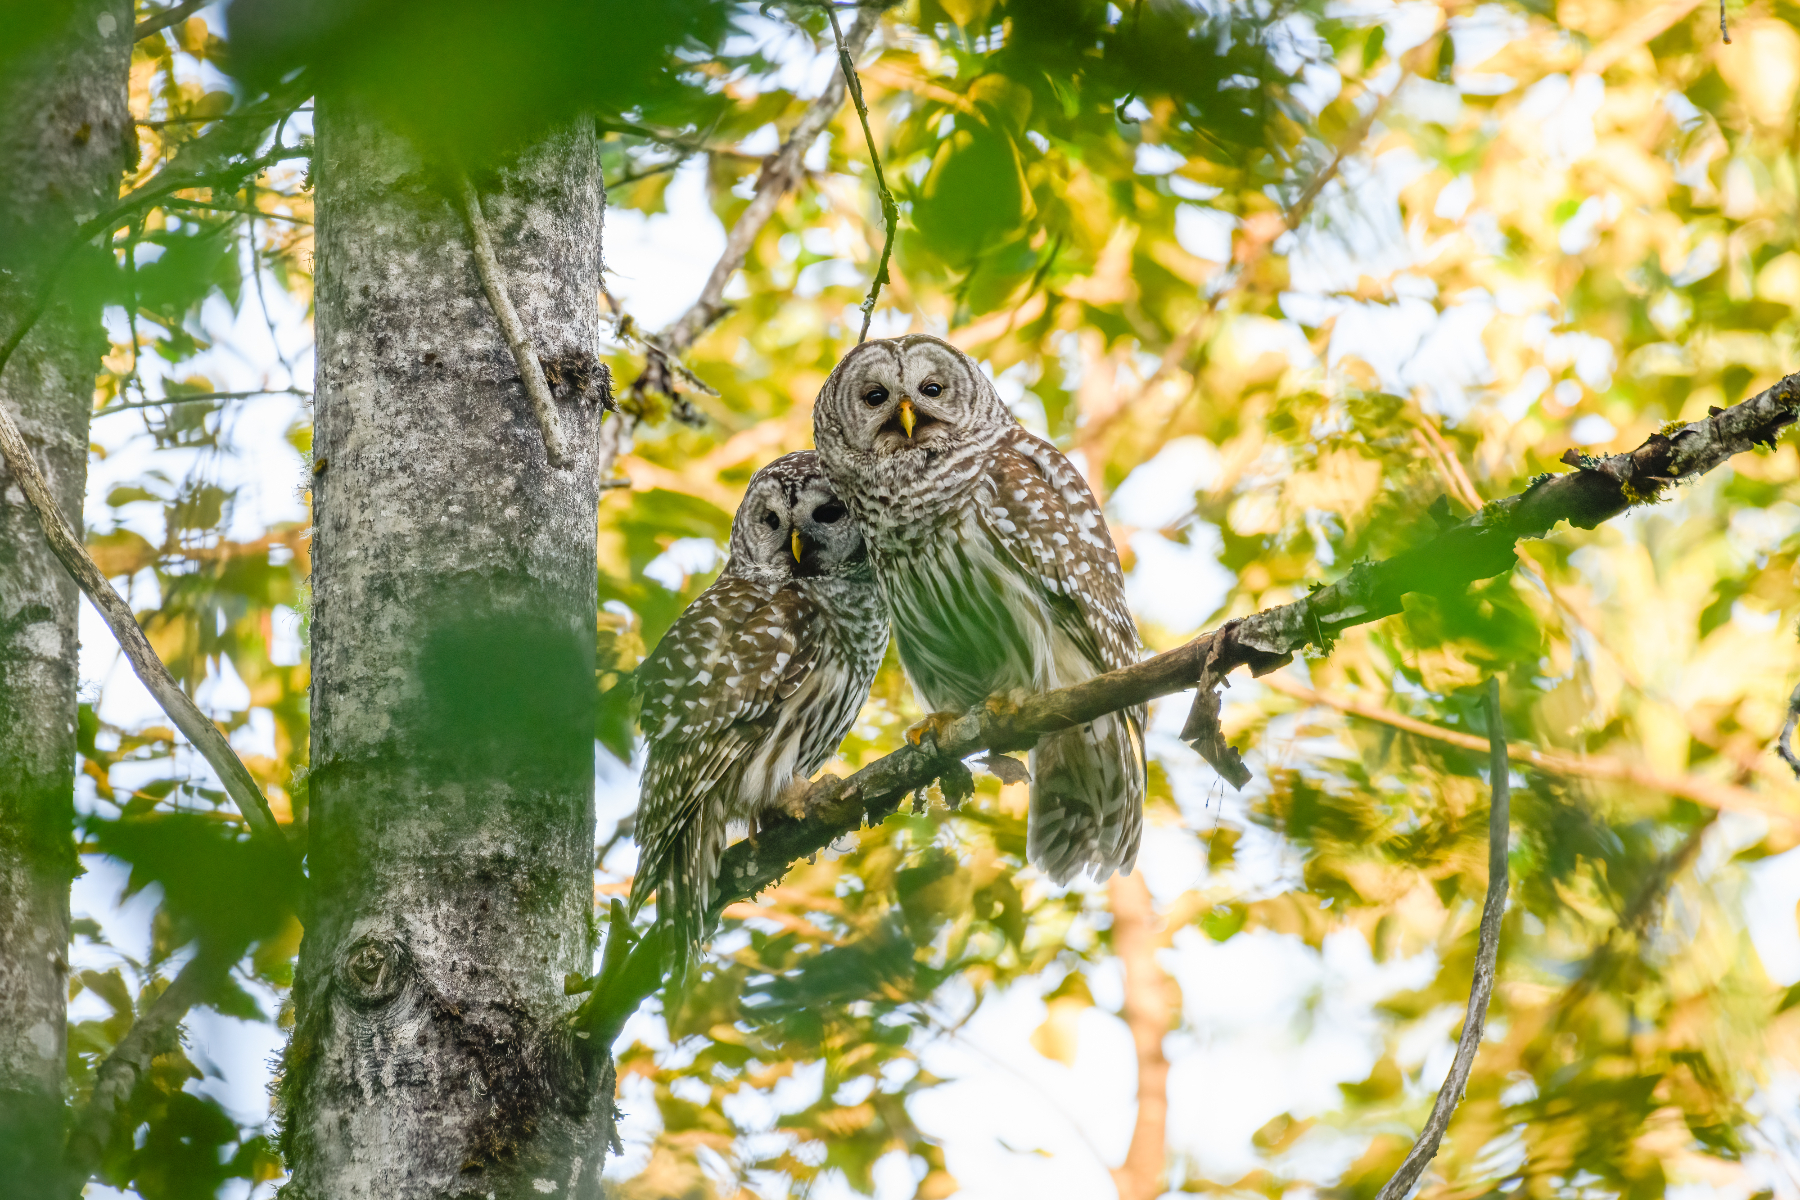 Two barred owls are perched together in a tree.